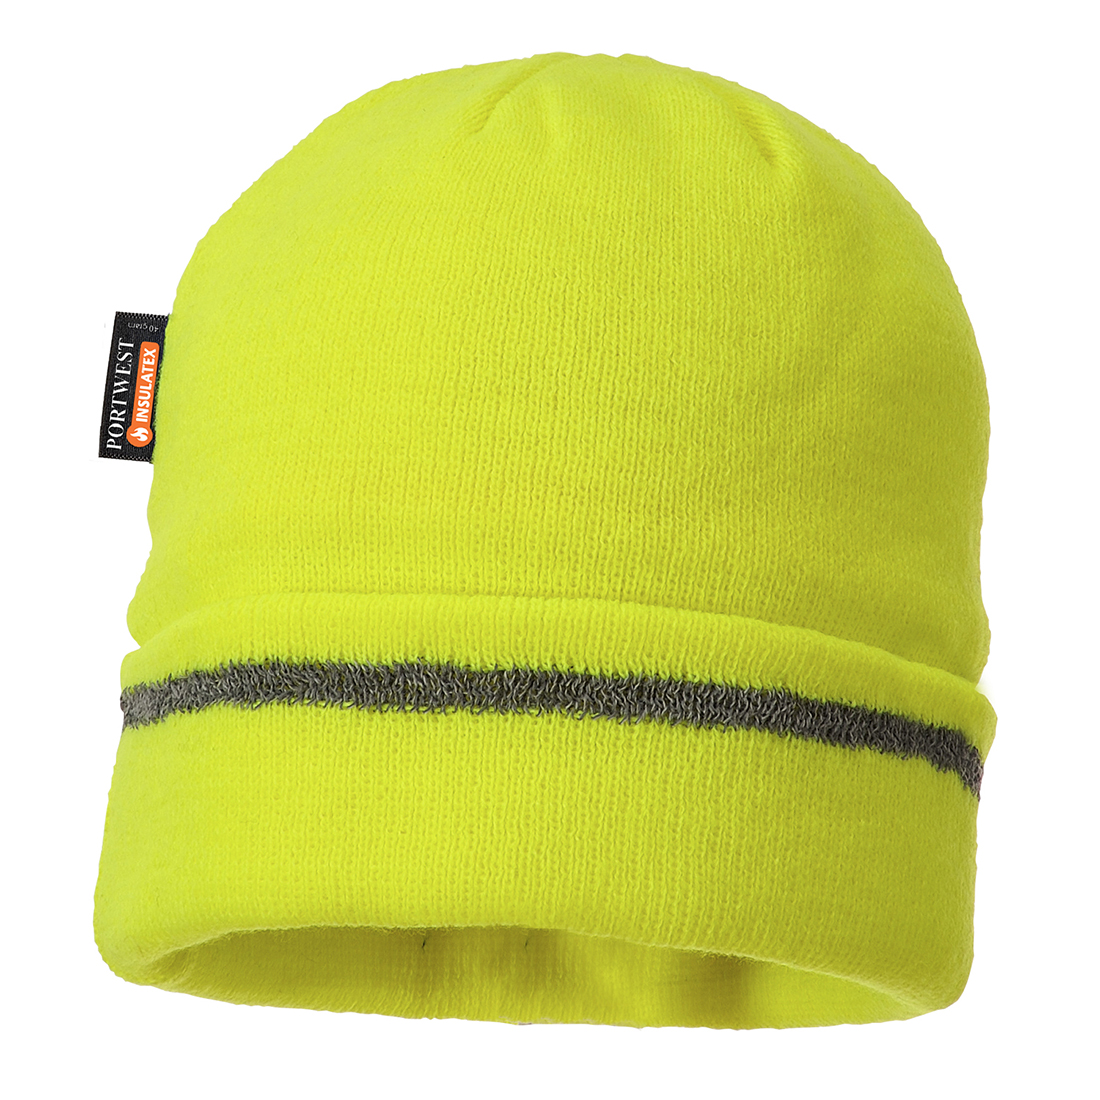 Reflective Trim Knit Hat Insulatex Lined Size  Yellow